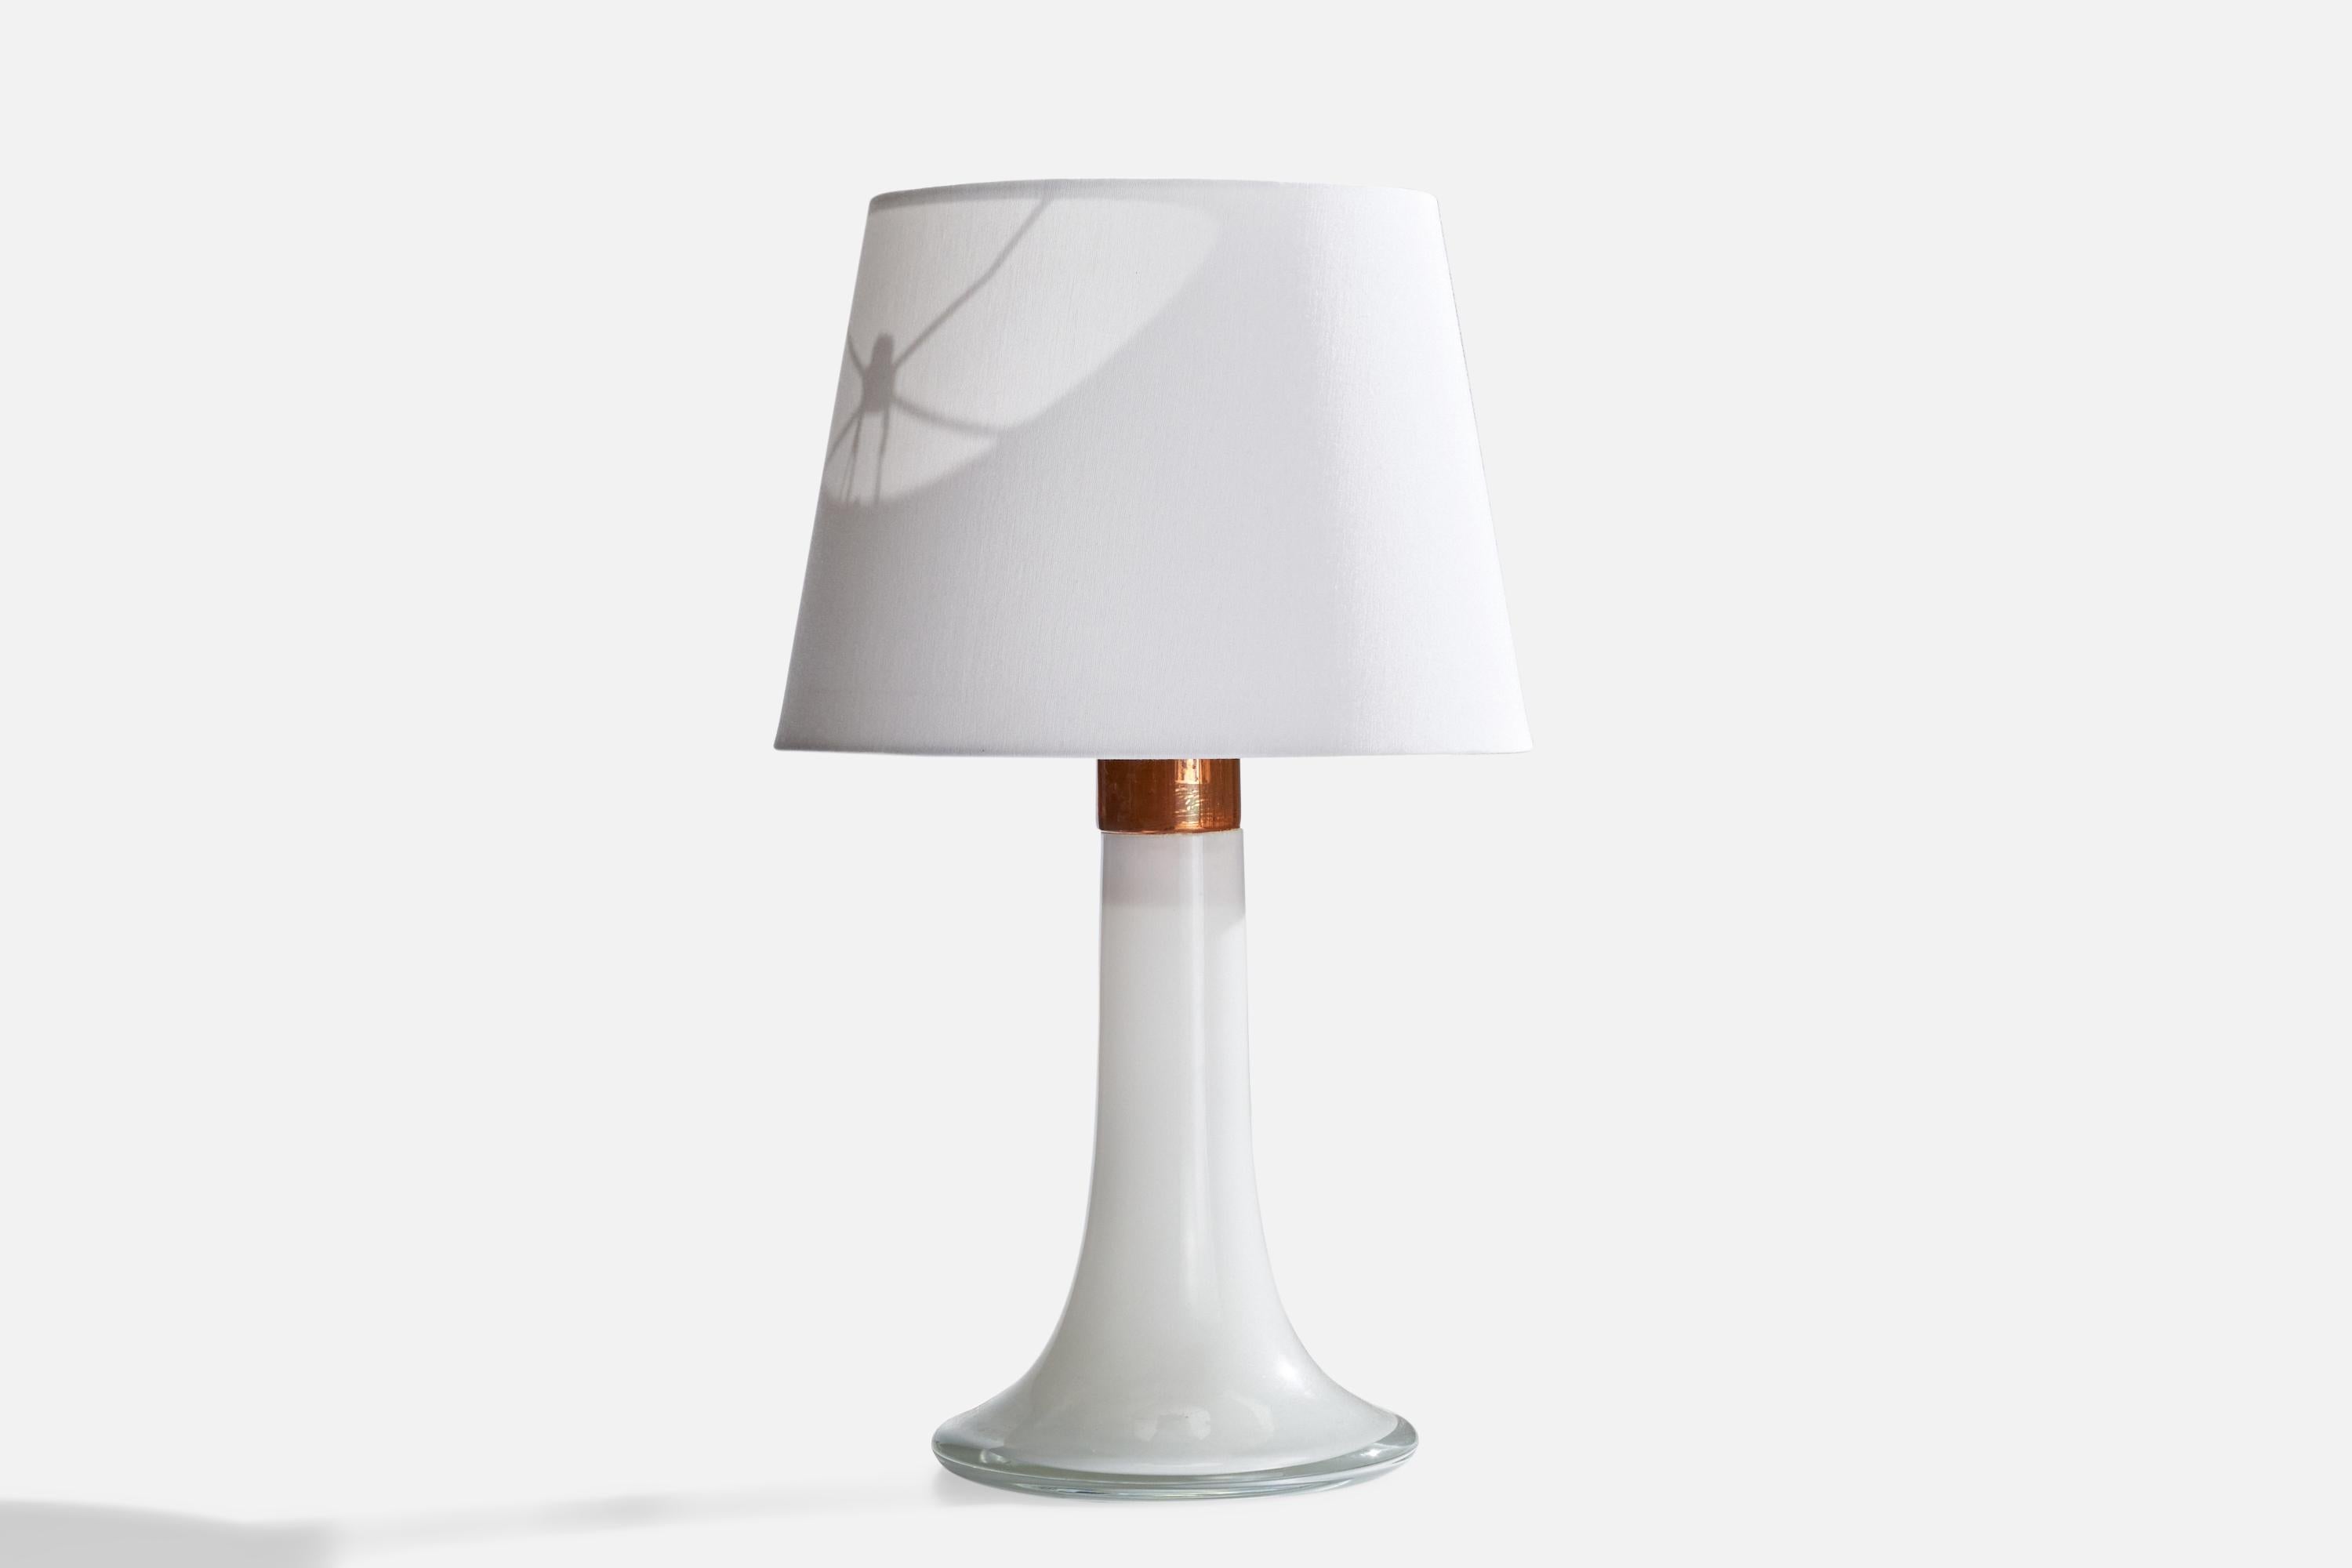 A copper and opaline glass table lamp, designed by Lisa Johansson-Pape and produced by Ornö, OY, Finland, 1960s.

Dimensions of Lamp (inches): 15” H x 7.5”  Diameter
Dimensions of Shade (inches): 9” Top Diameter x 12” Bottom Diameter x 9”